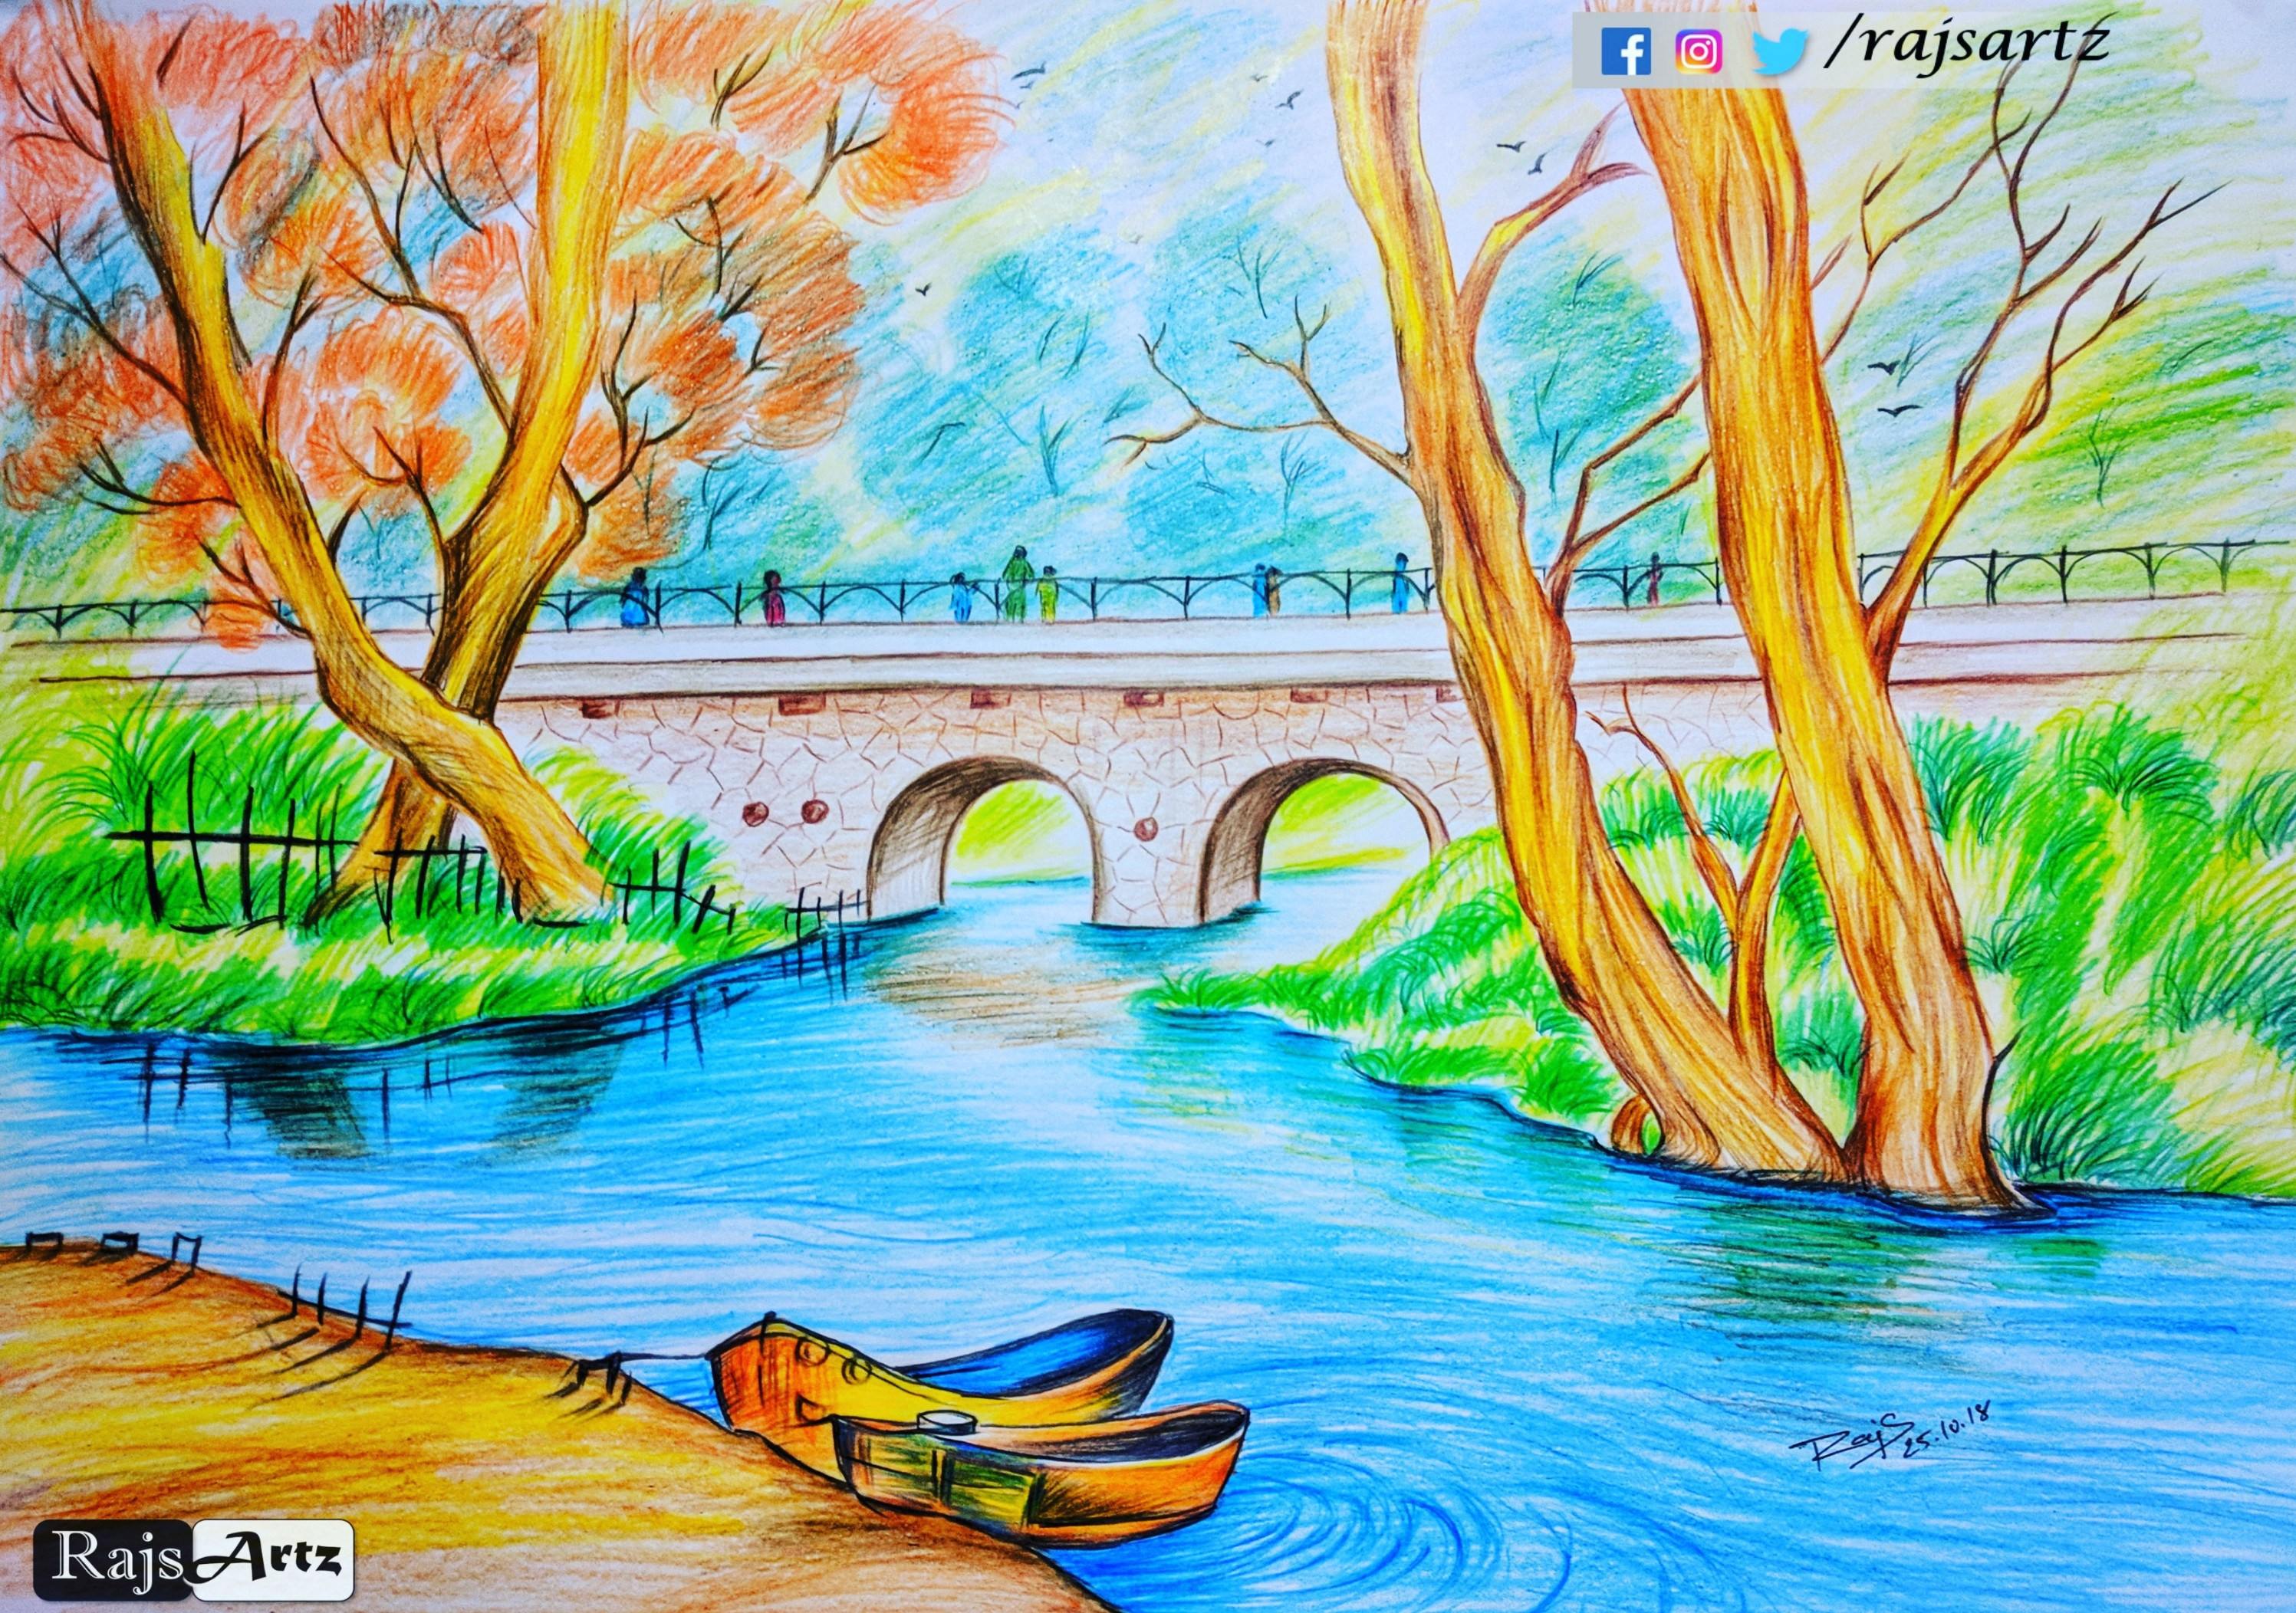 Bridge by the river pencil sketch 2013 by ArchitectSketches on DeviantArt